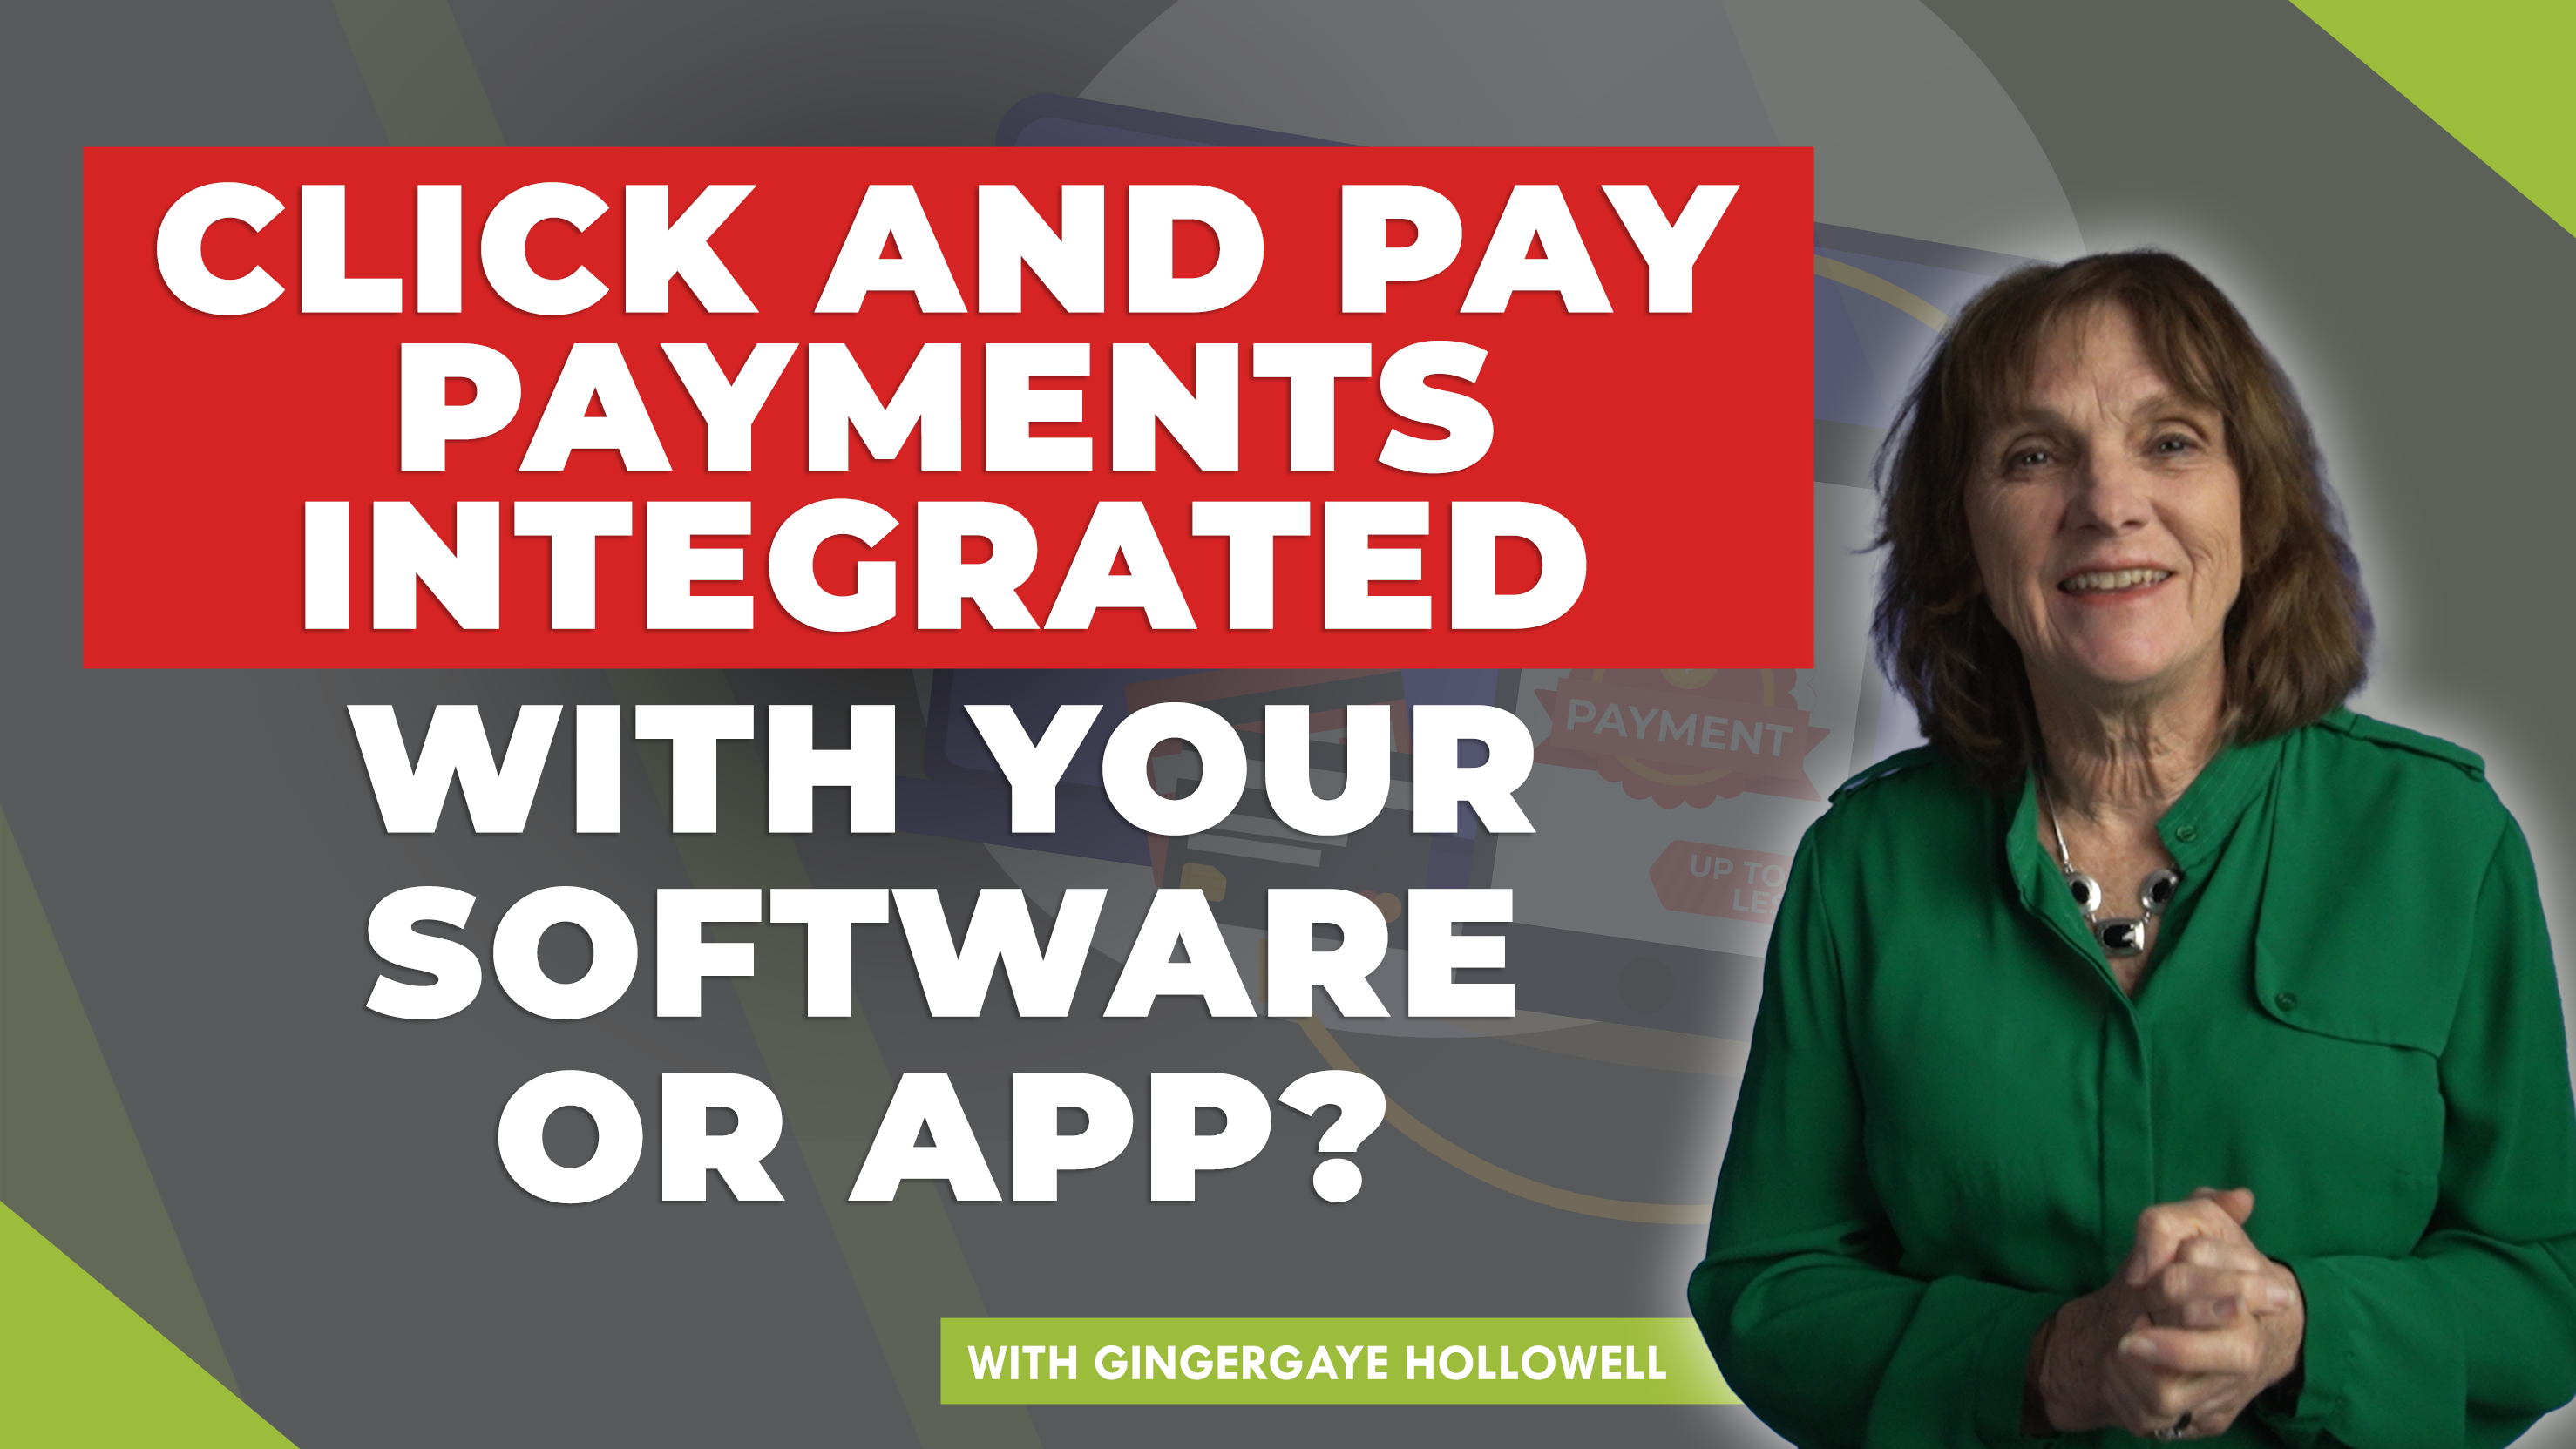 Want click-and-Pay Payments Integrated with Your Software or App